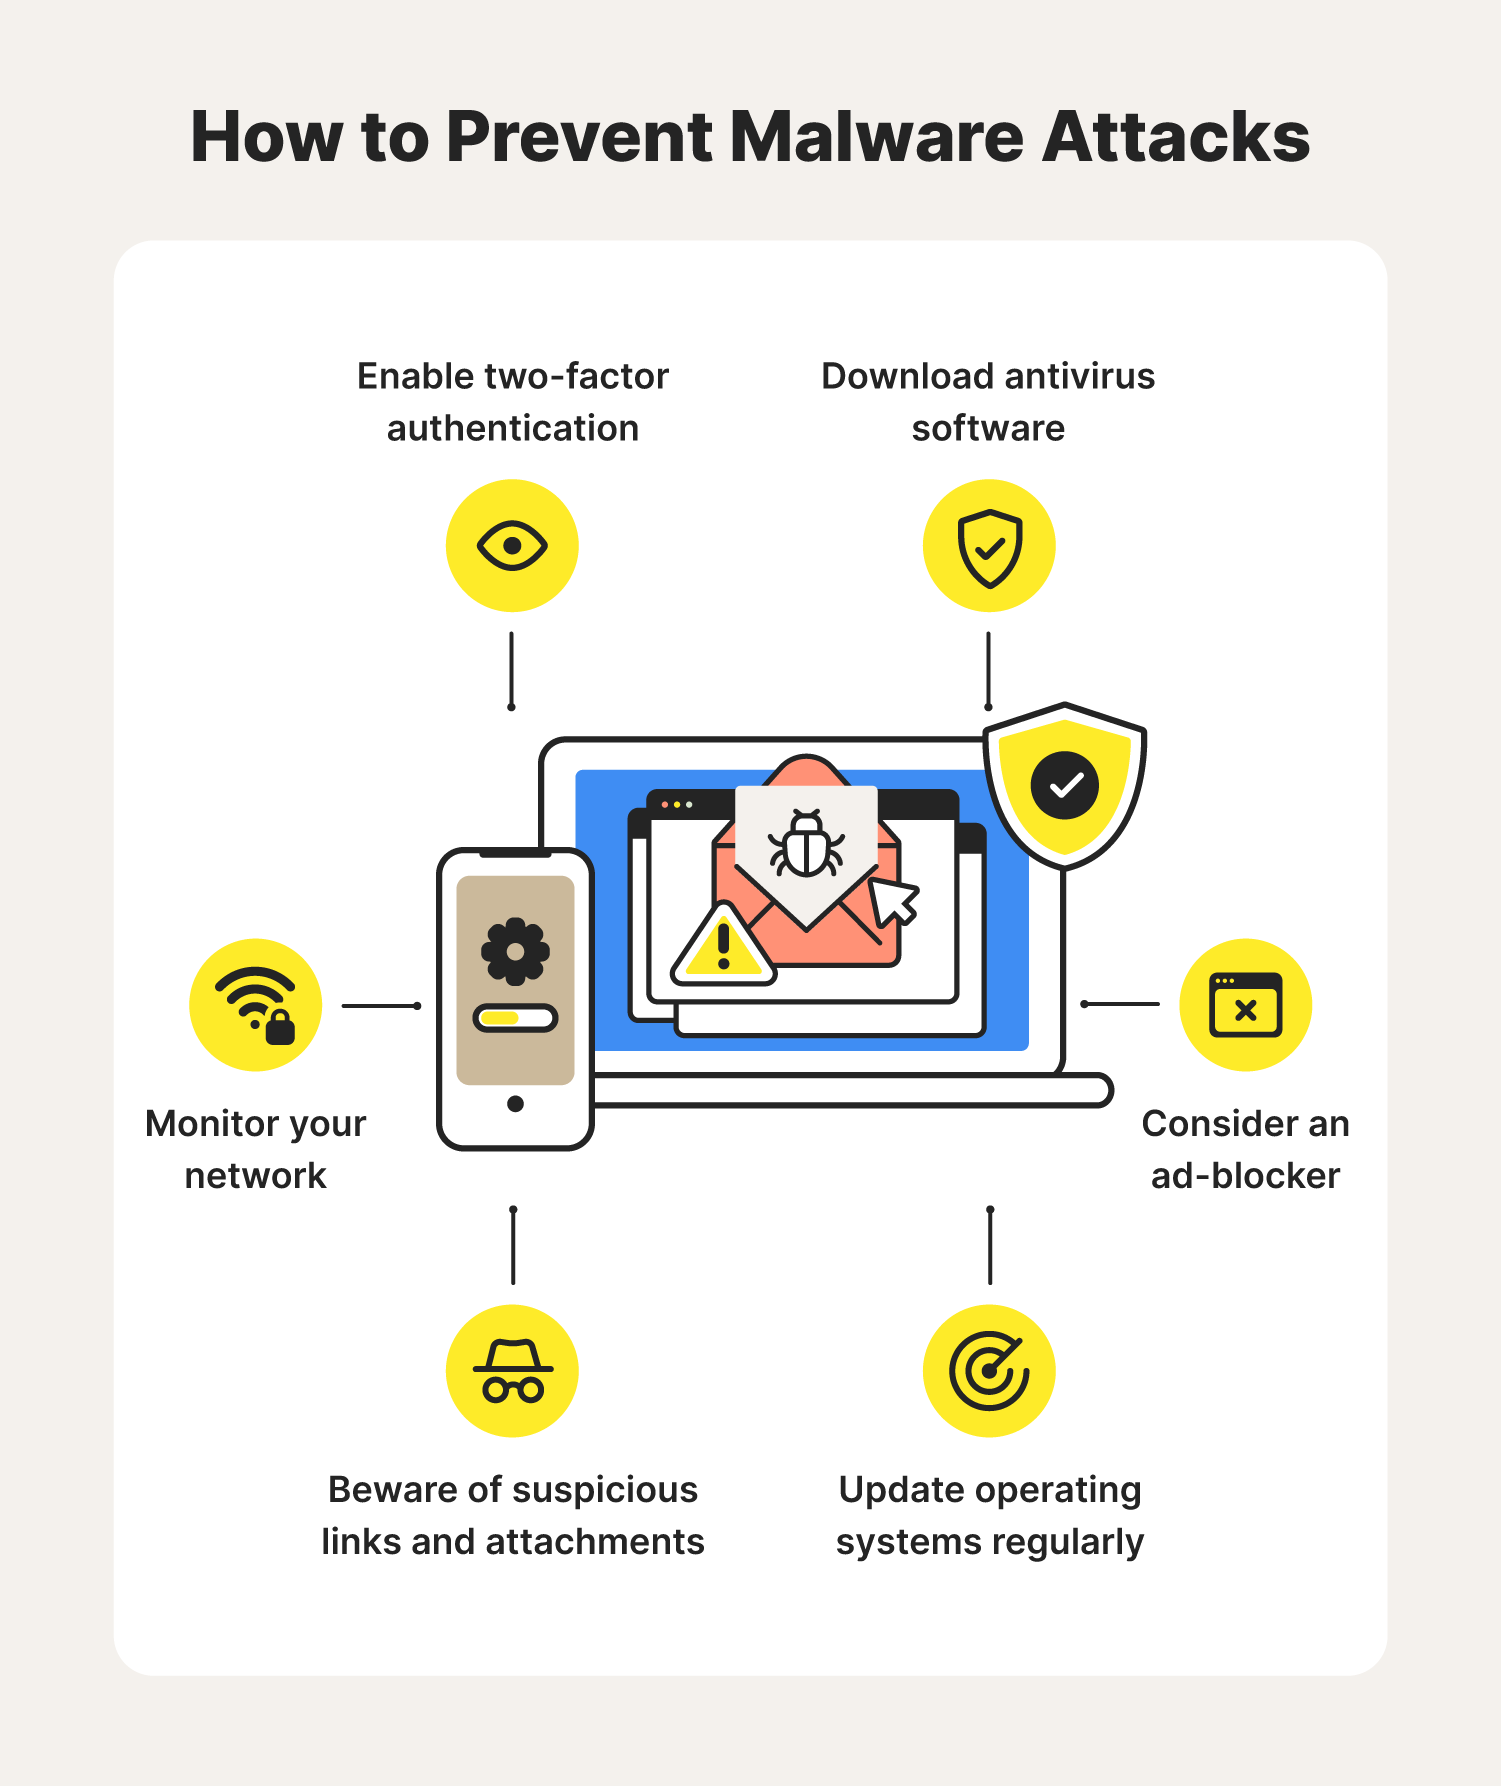 How to prevent malware attacks